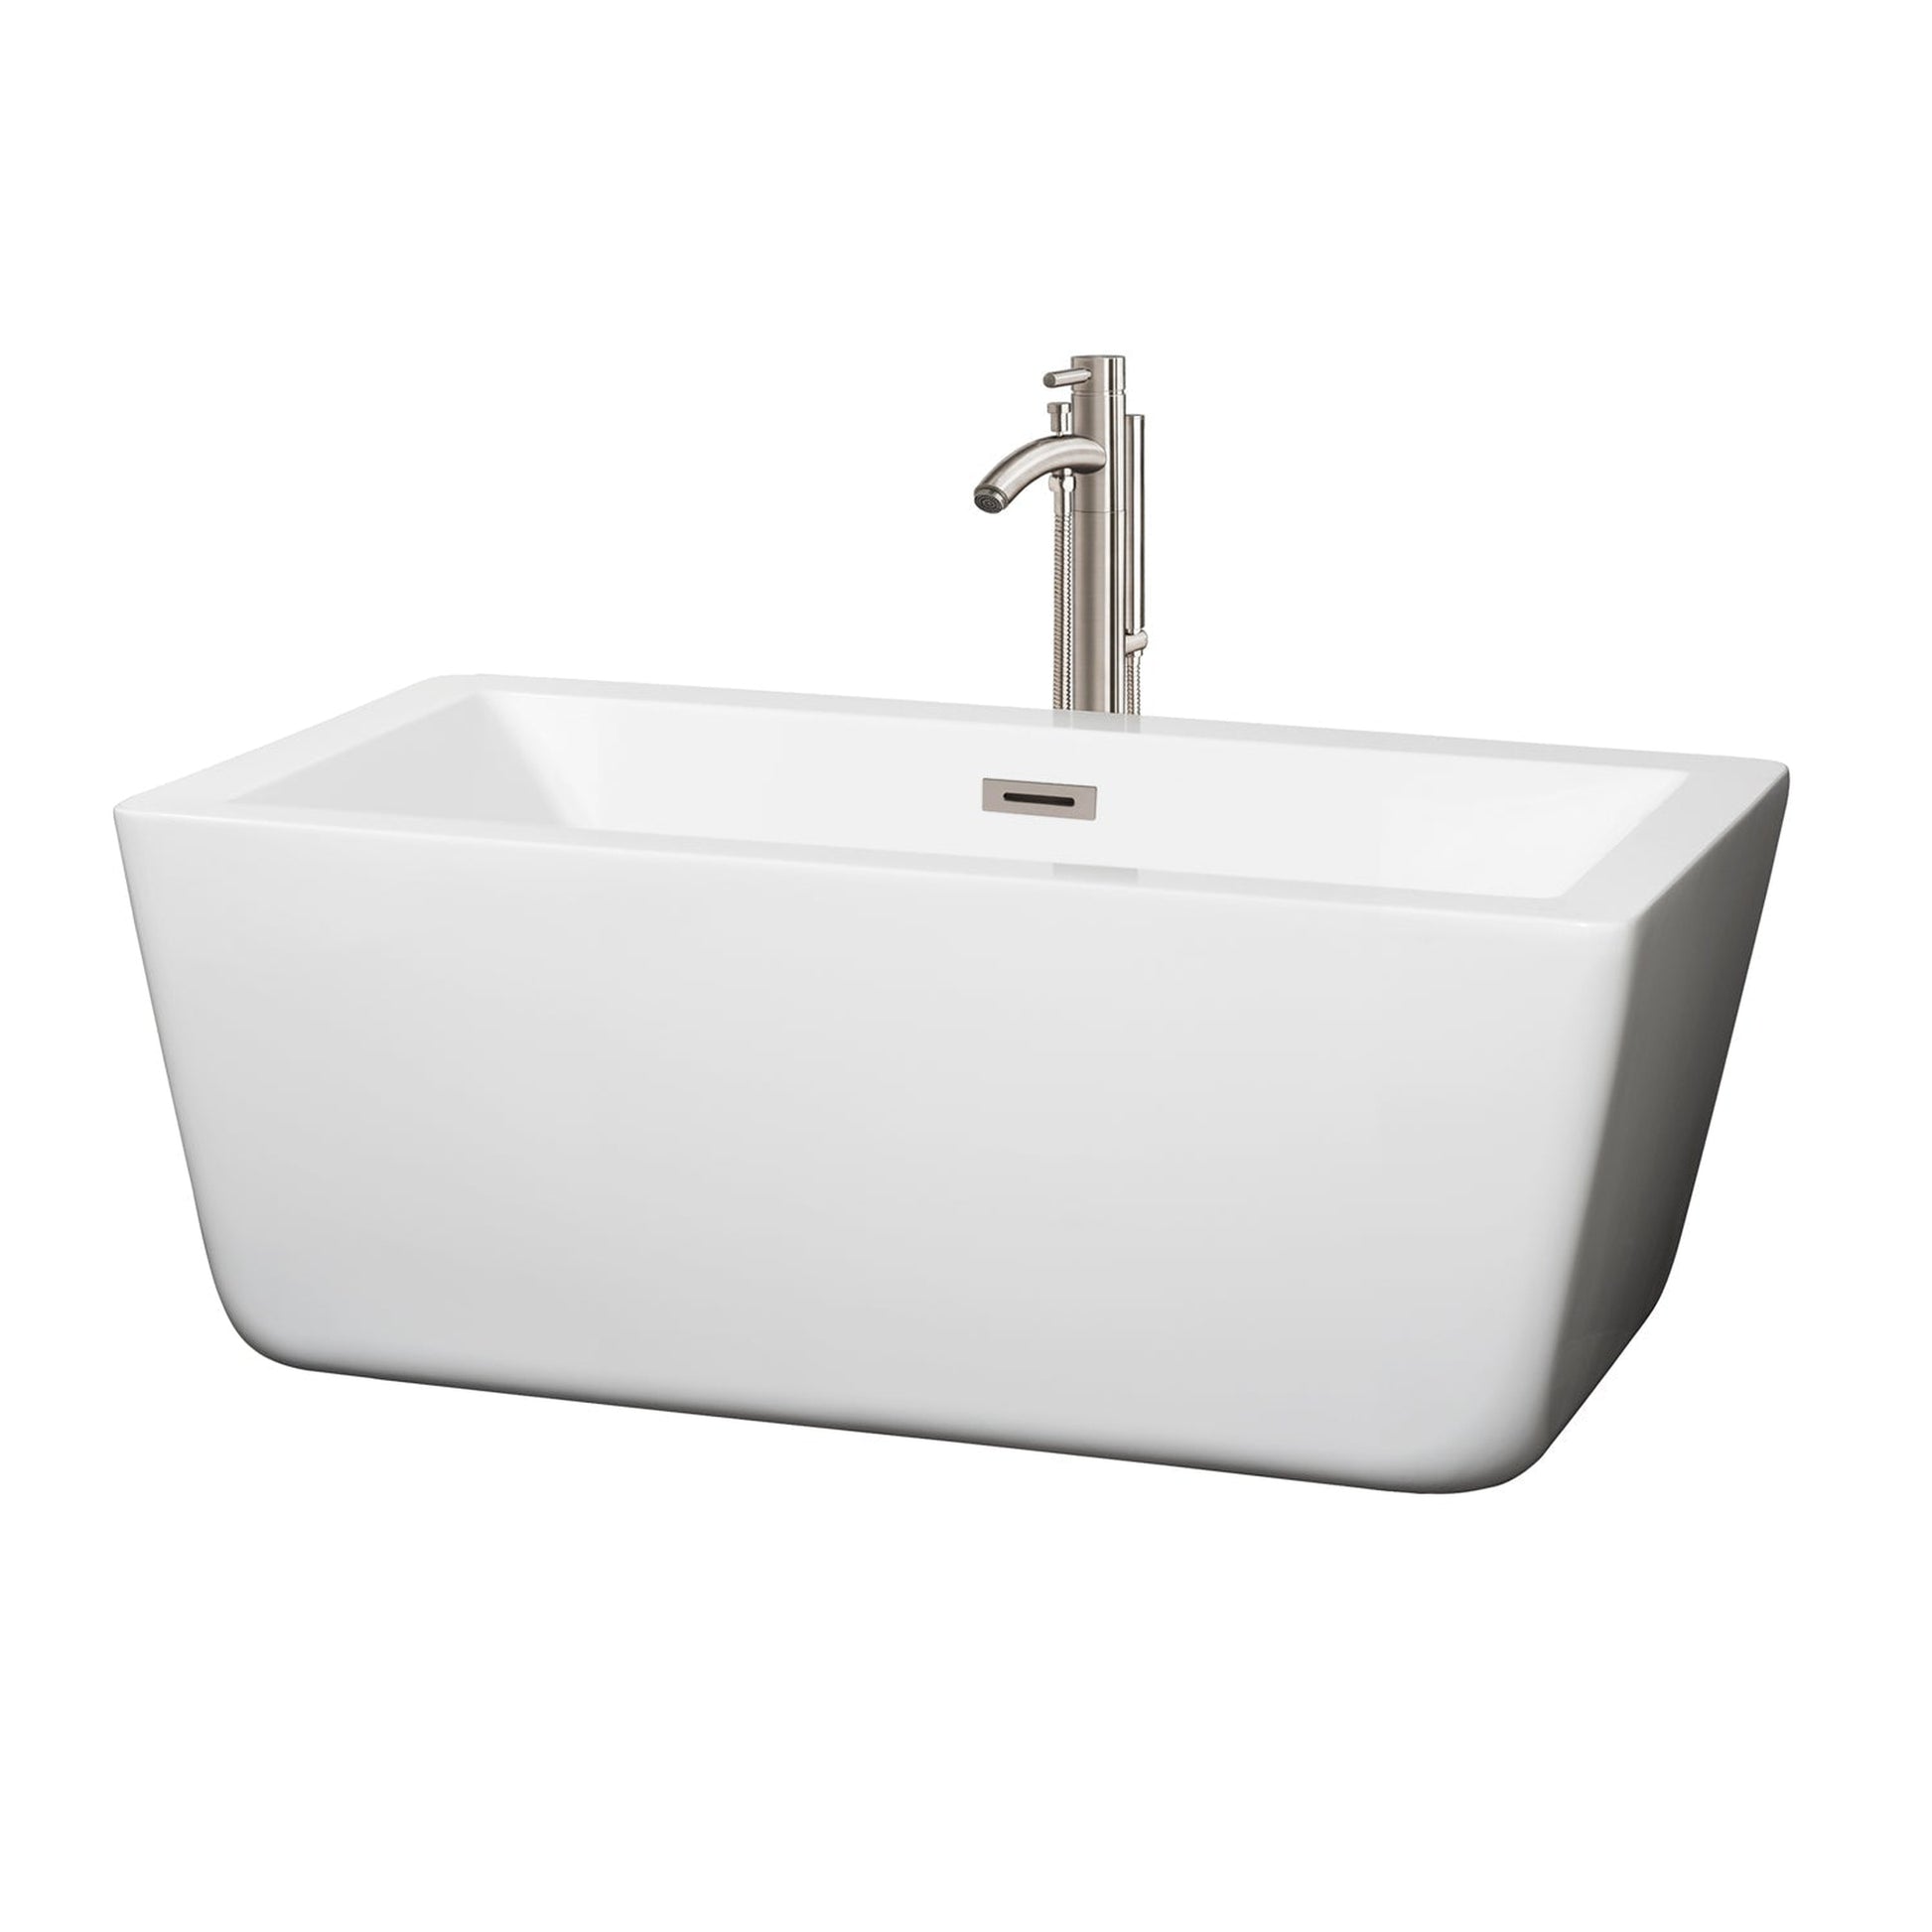 Wyndham Collection Laura 59" Freestanding Bathtub in White With Floor Mounted Faucet, Drain and Overflow Trim in Brushed Nickel